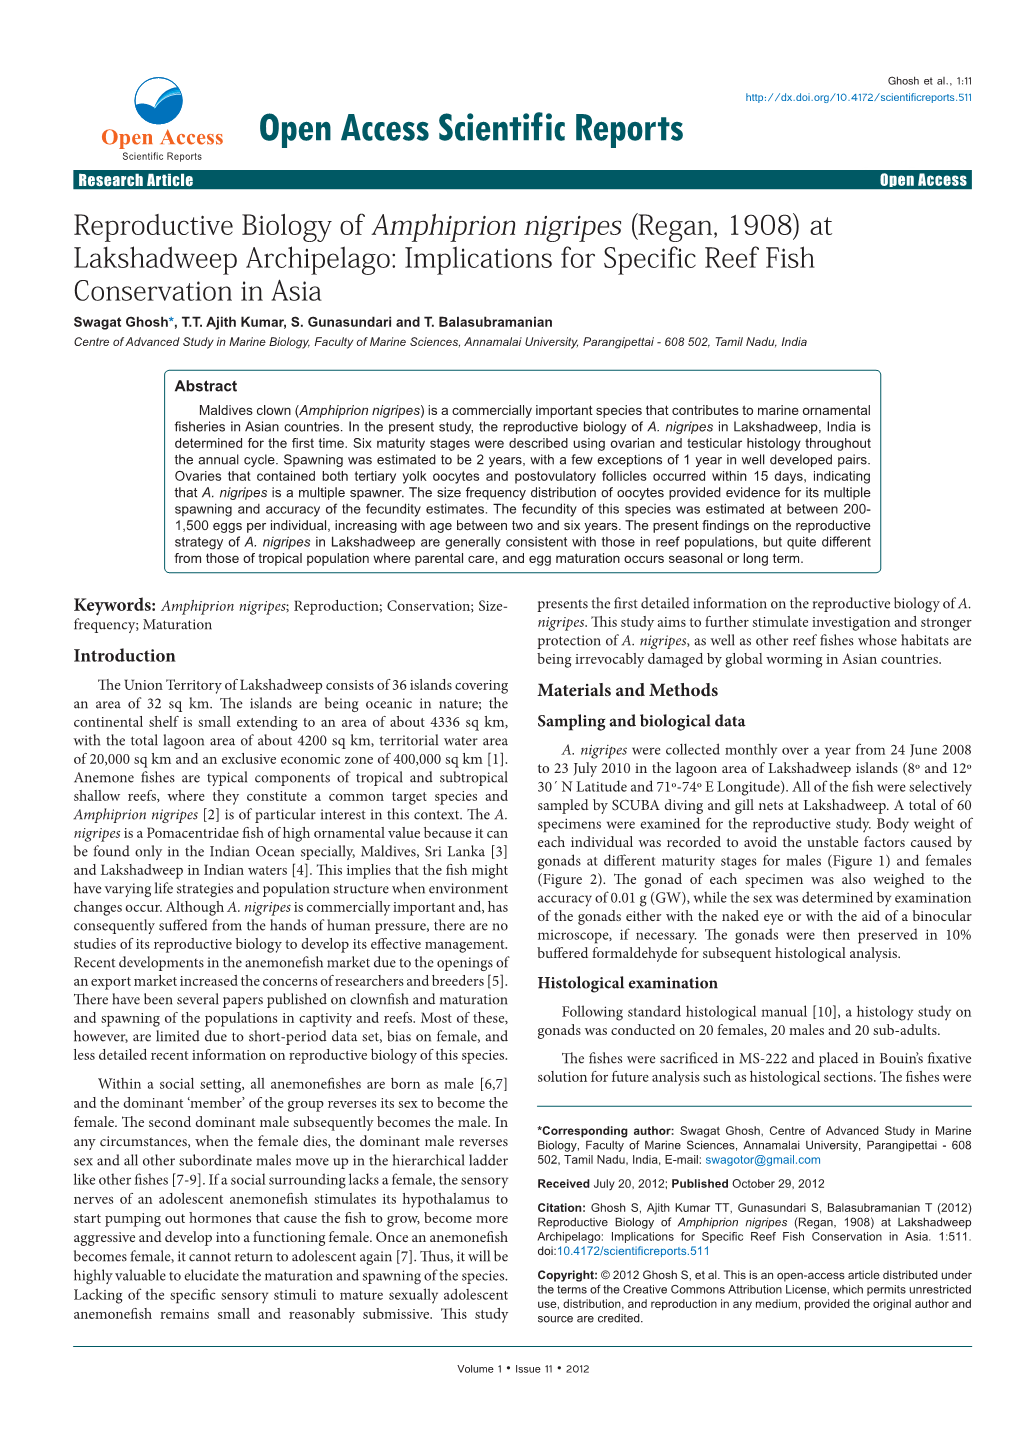 Reproductive Biology of Amphiprion Nigripes (Regan, 1908) at Lakshadweep Archipelago: Implications for Specific Reef Fish Conservation in Asia Swagat Ghosh*, T.T